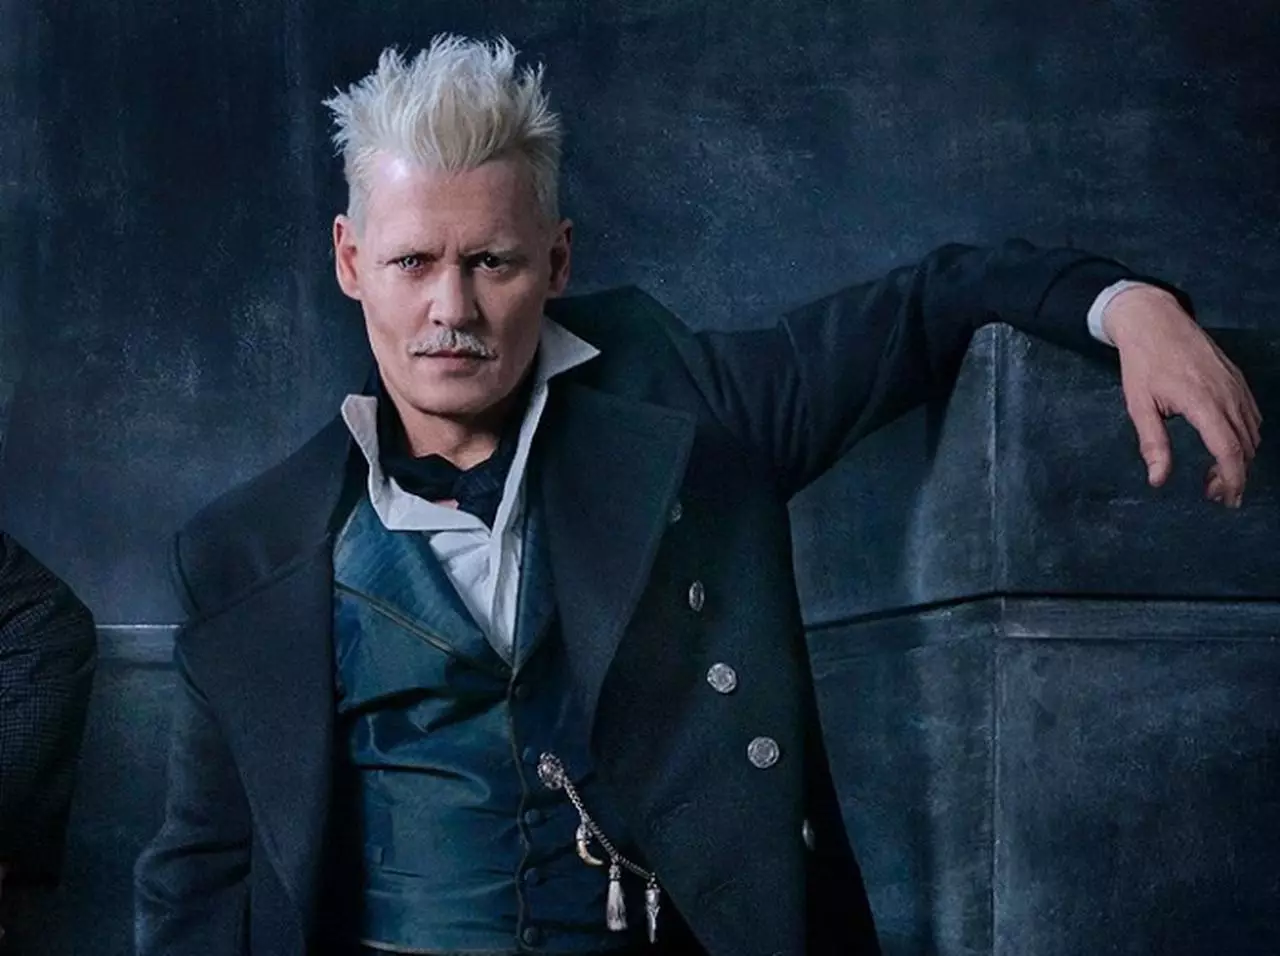 Johnny Depp starred as Grindelwald in the first two films.